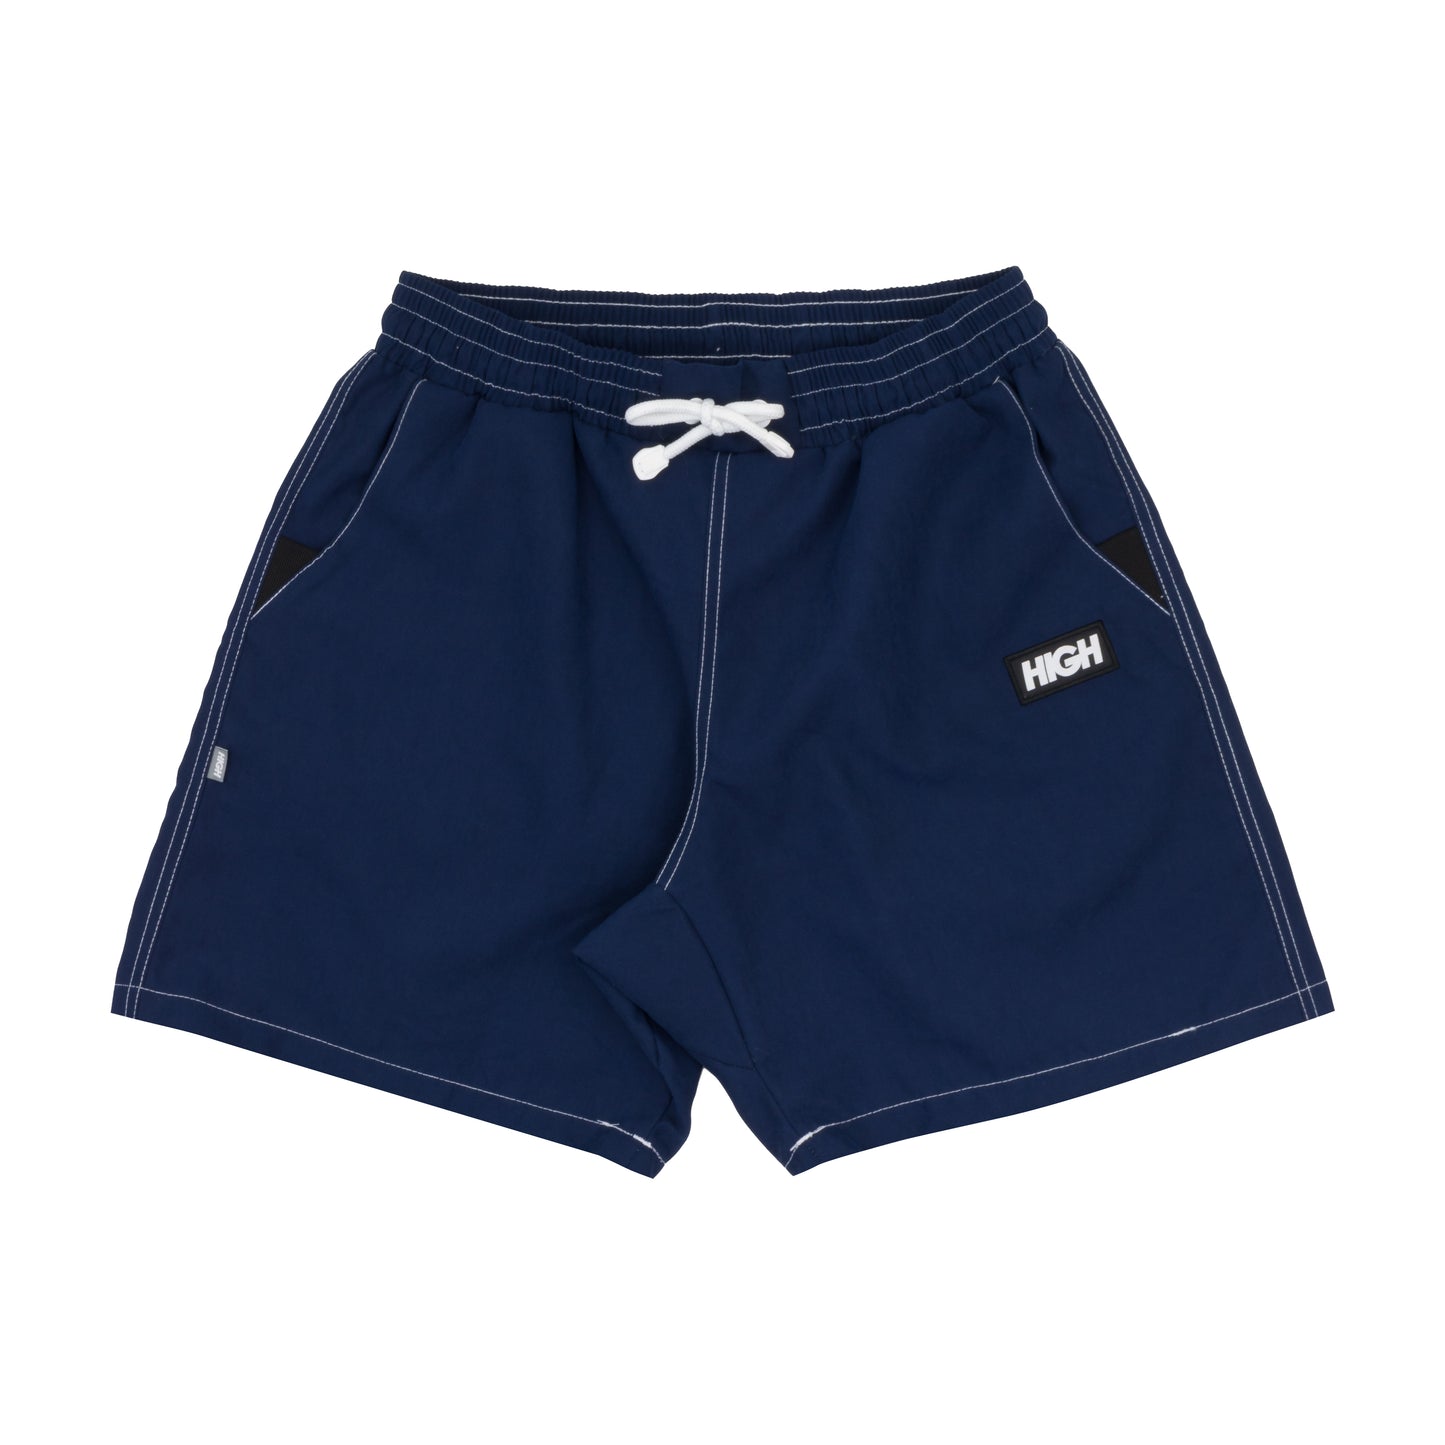 SHORTS HIGH COLORED NAVY